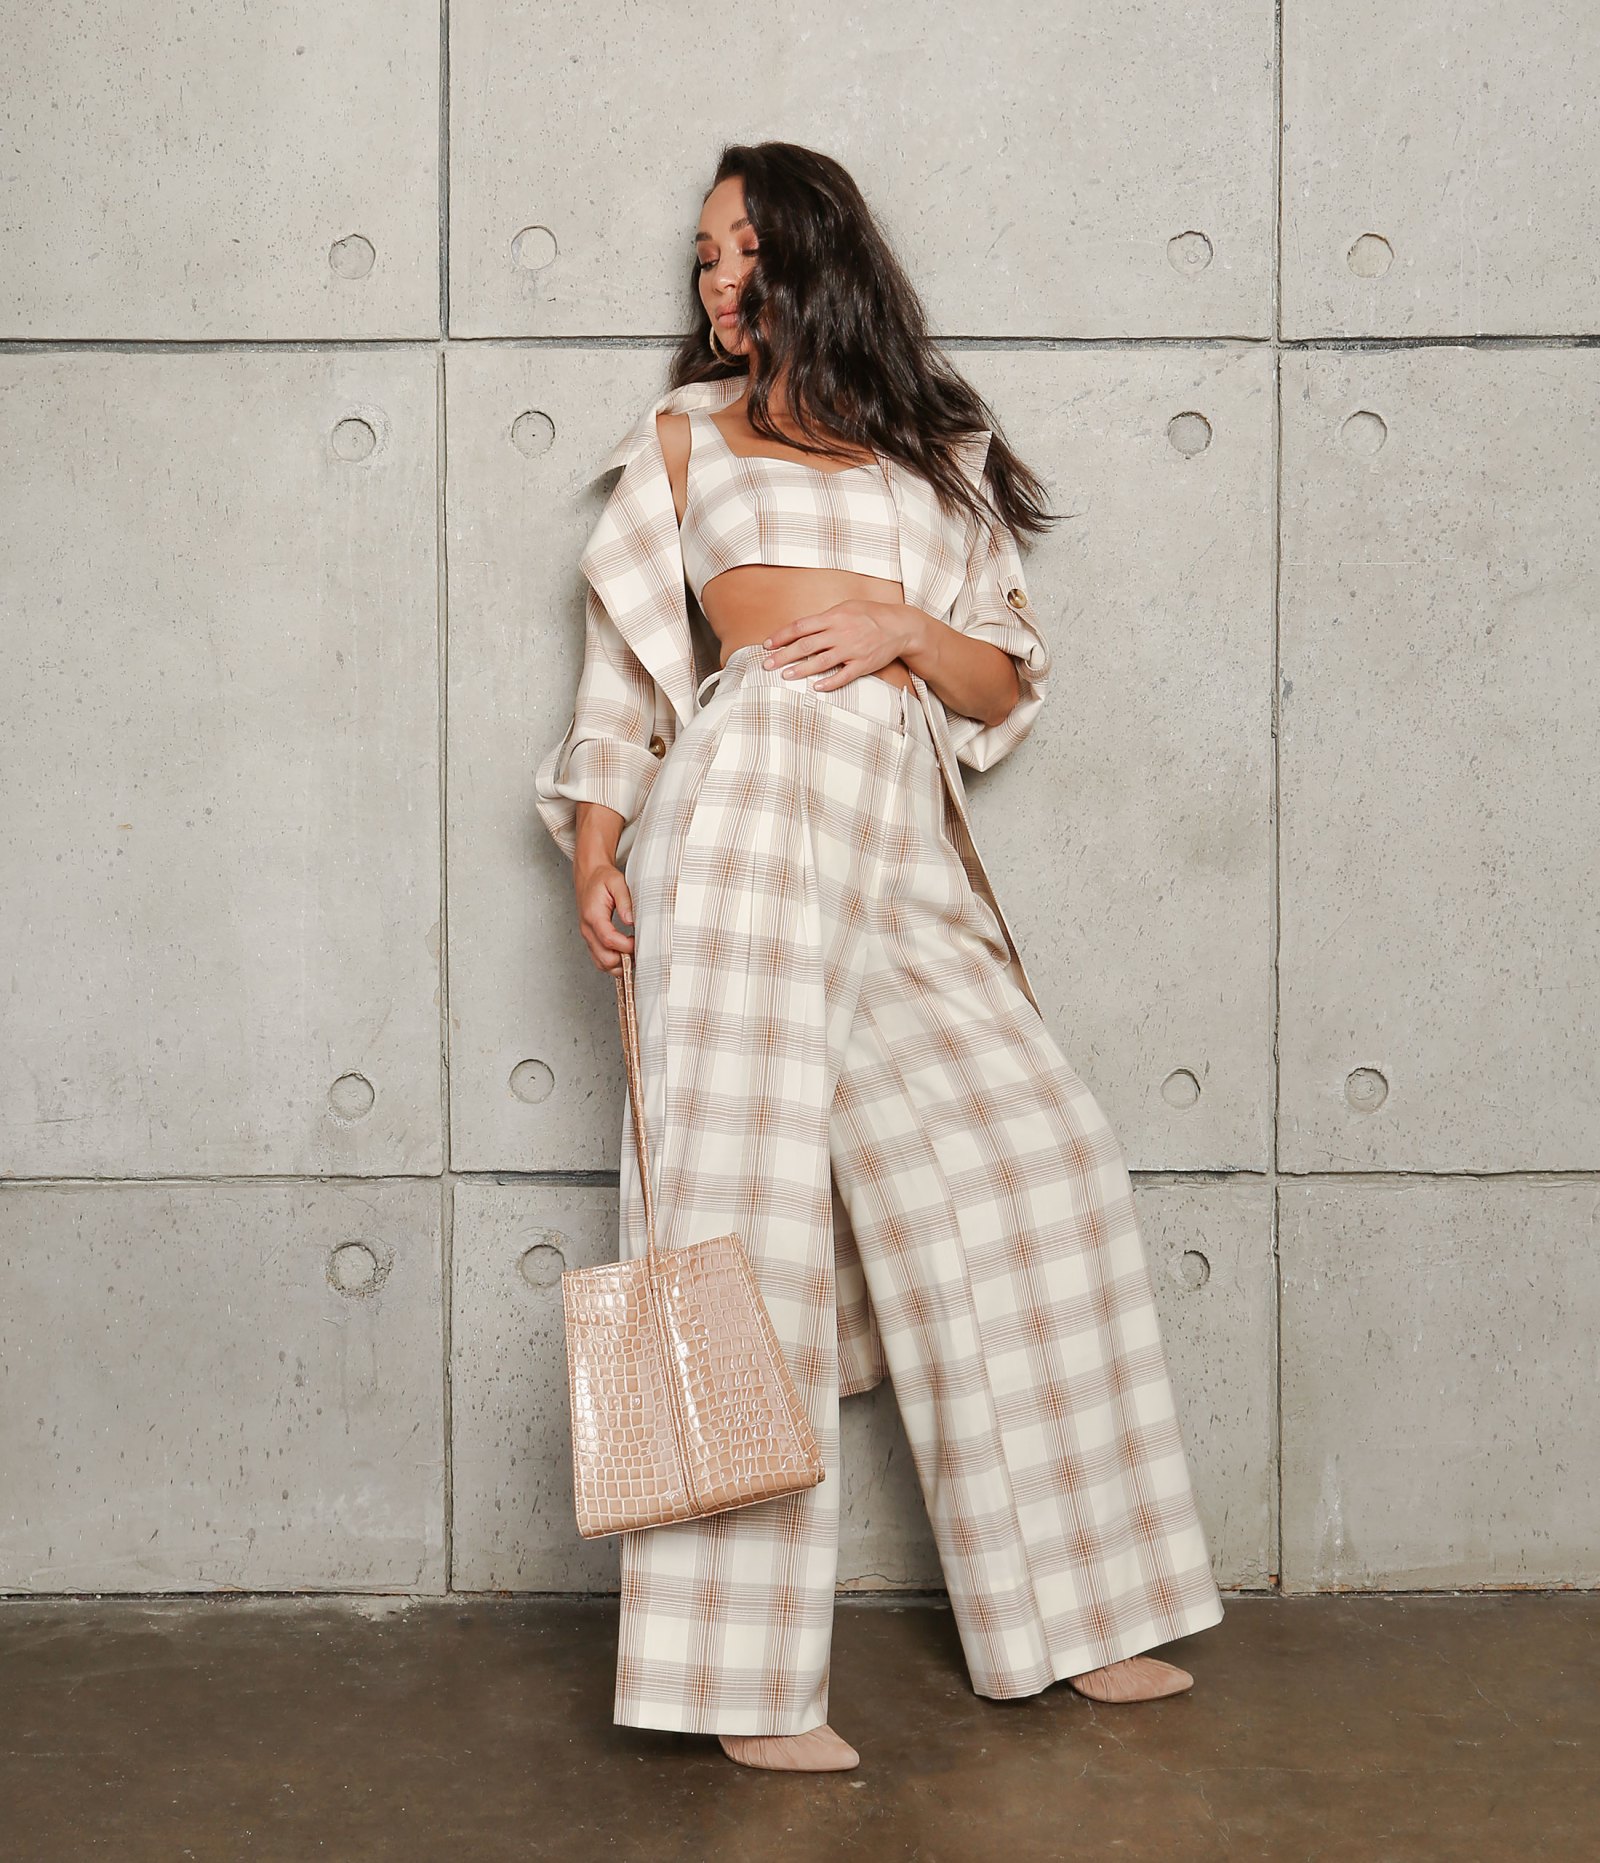 Cara Santana Talks to Us About Her Latest Collection